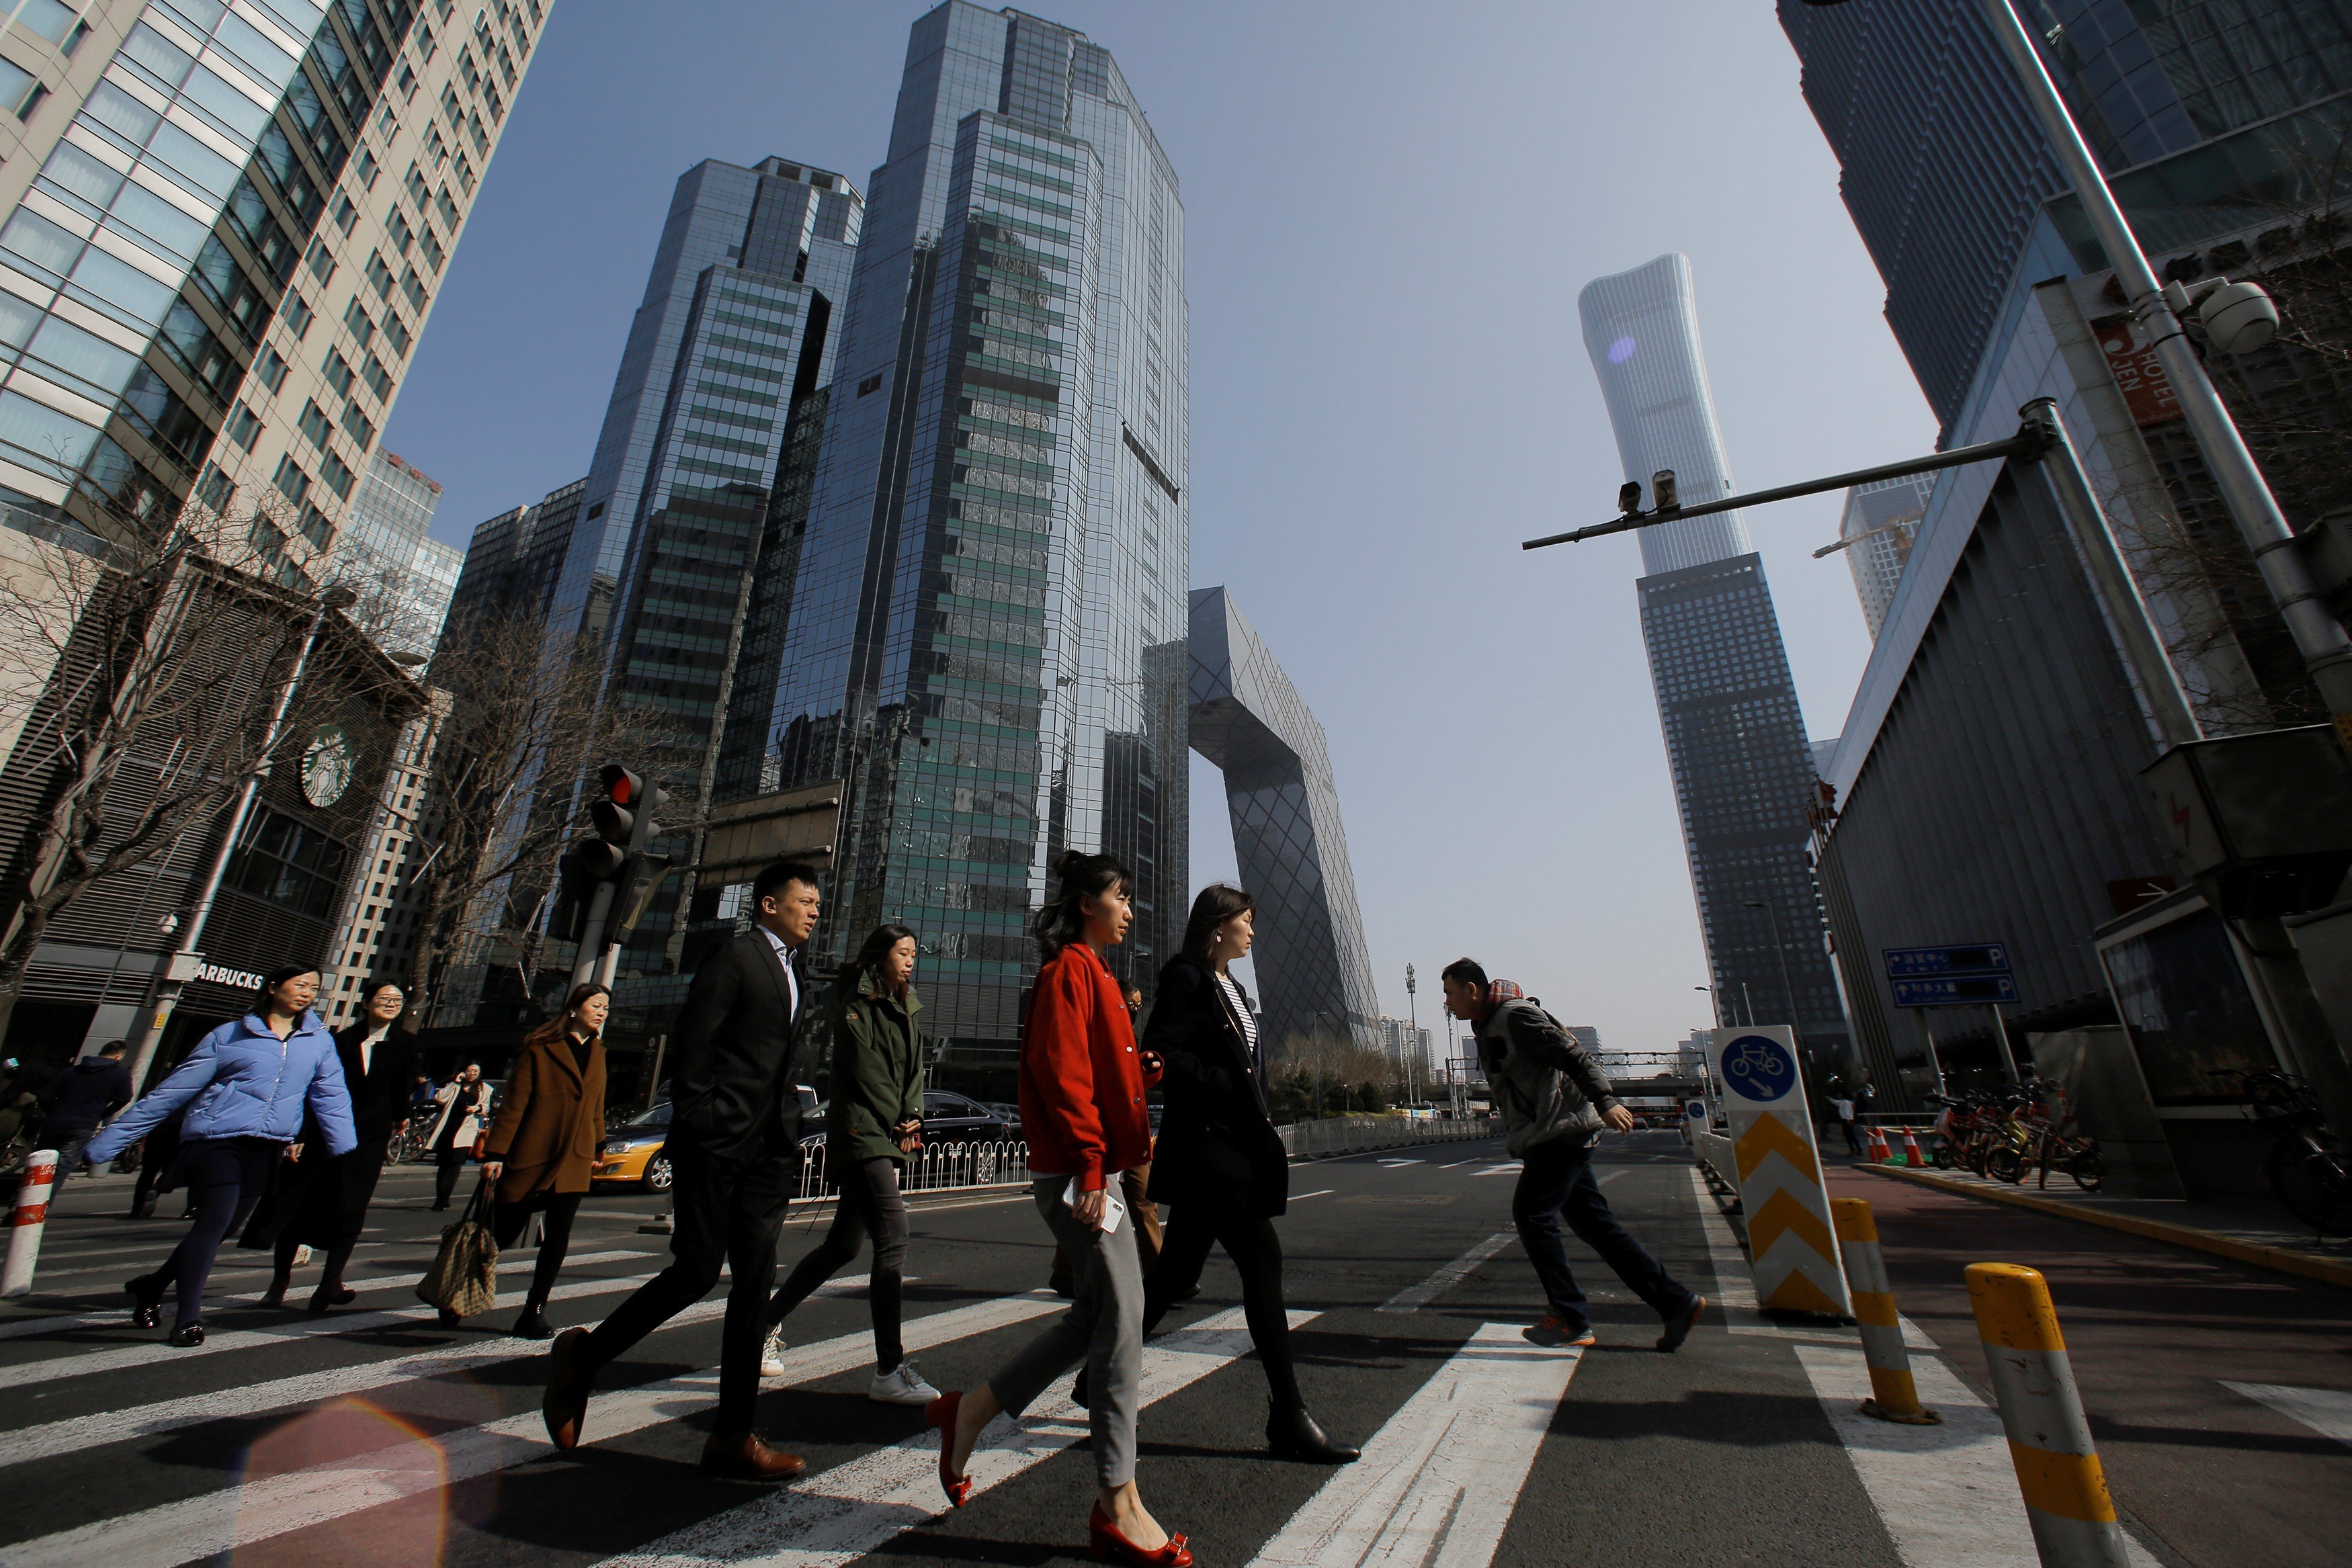 S&P is ahead of the other two major ratings agencies, Moody’s and Fitch, when it comes to capturing business in China’s onshore bond market. Photo: Reuters